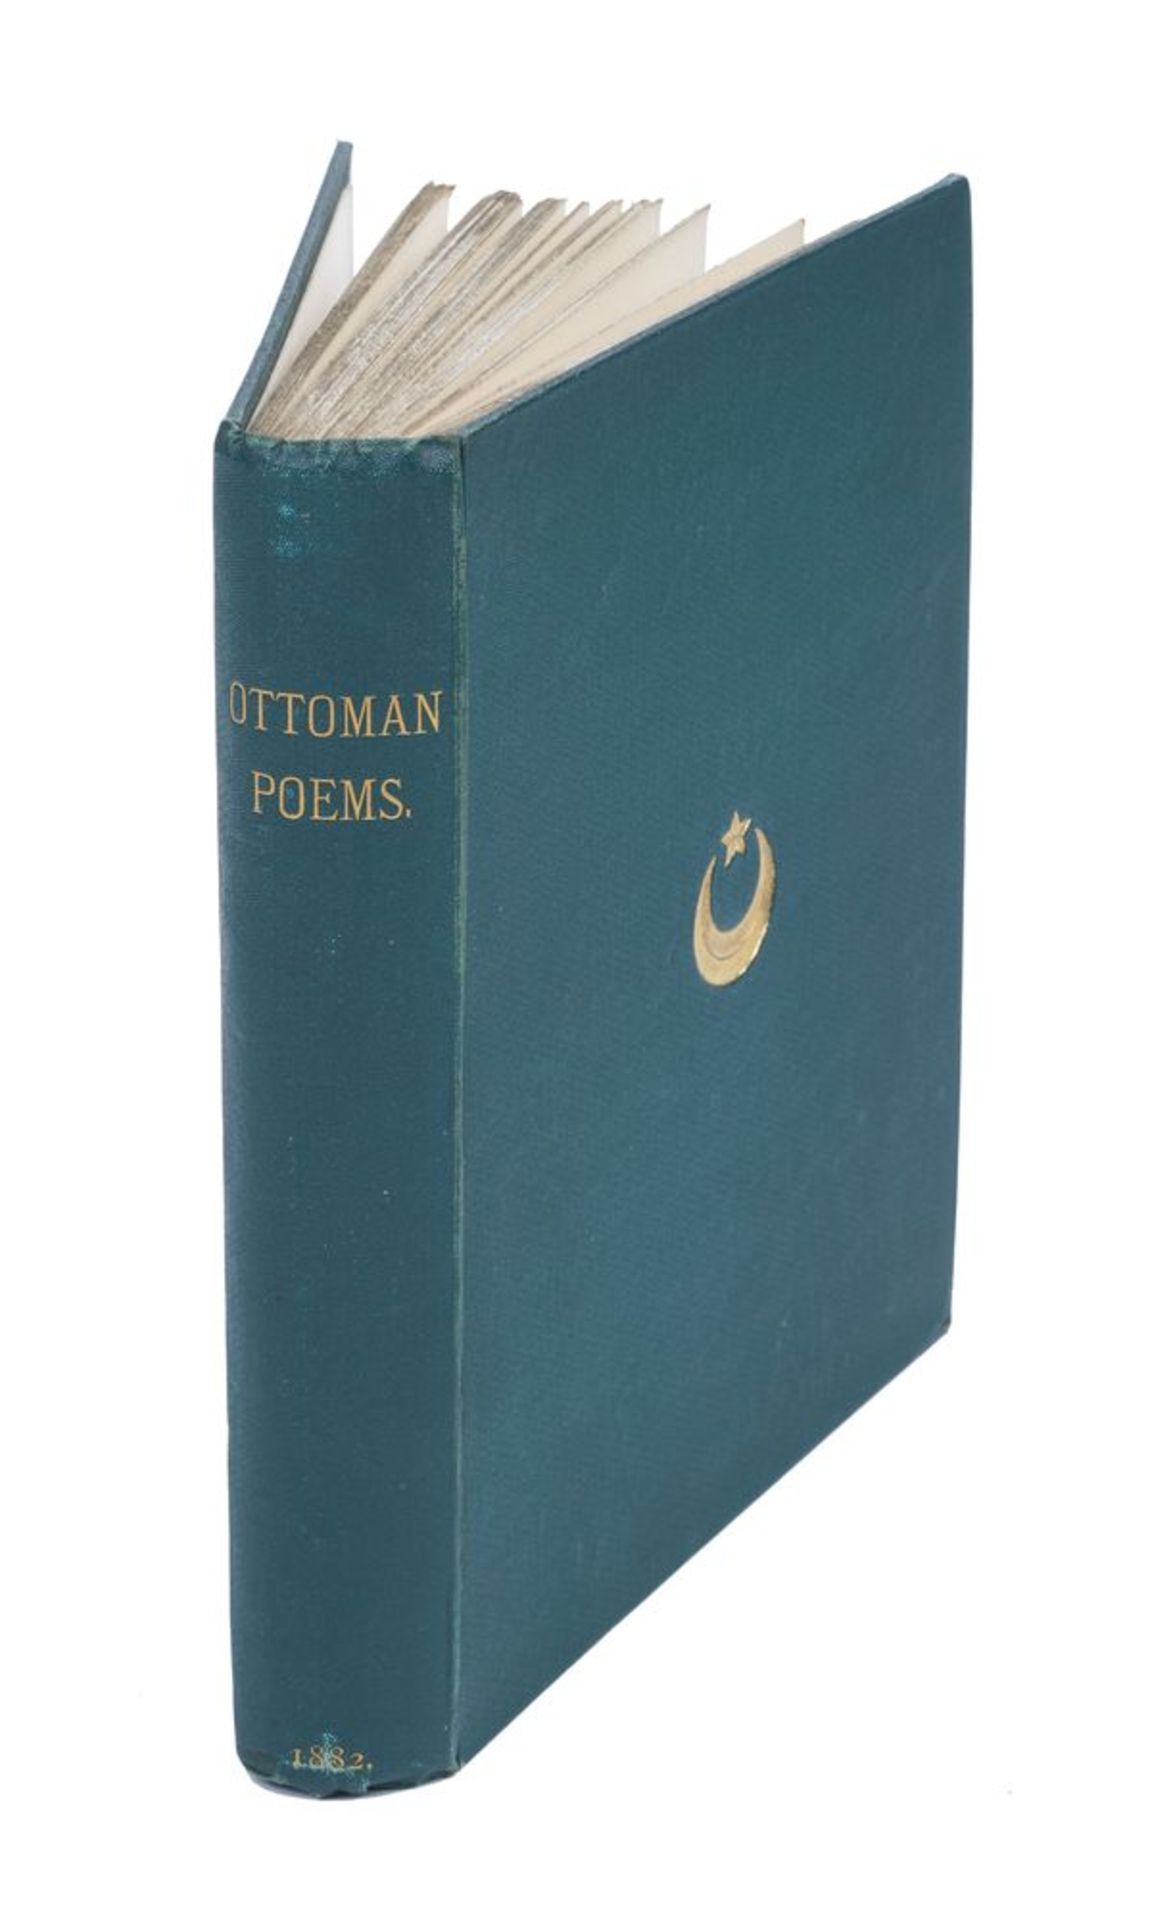 OTTOMAN POEMS - Ottoman poems, translated into English verse in the original forms, [...]